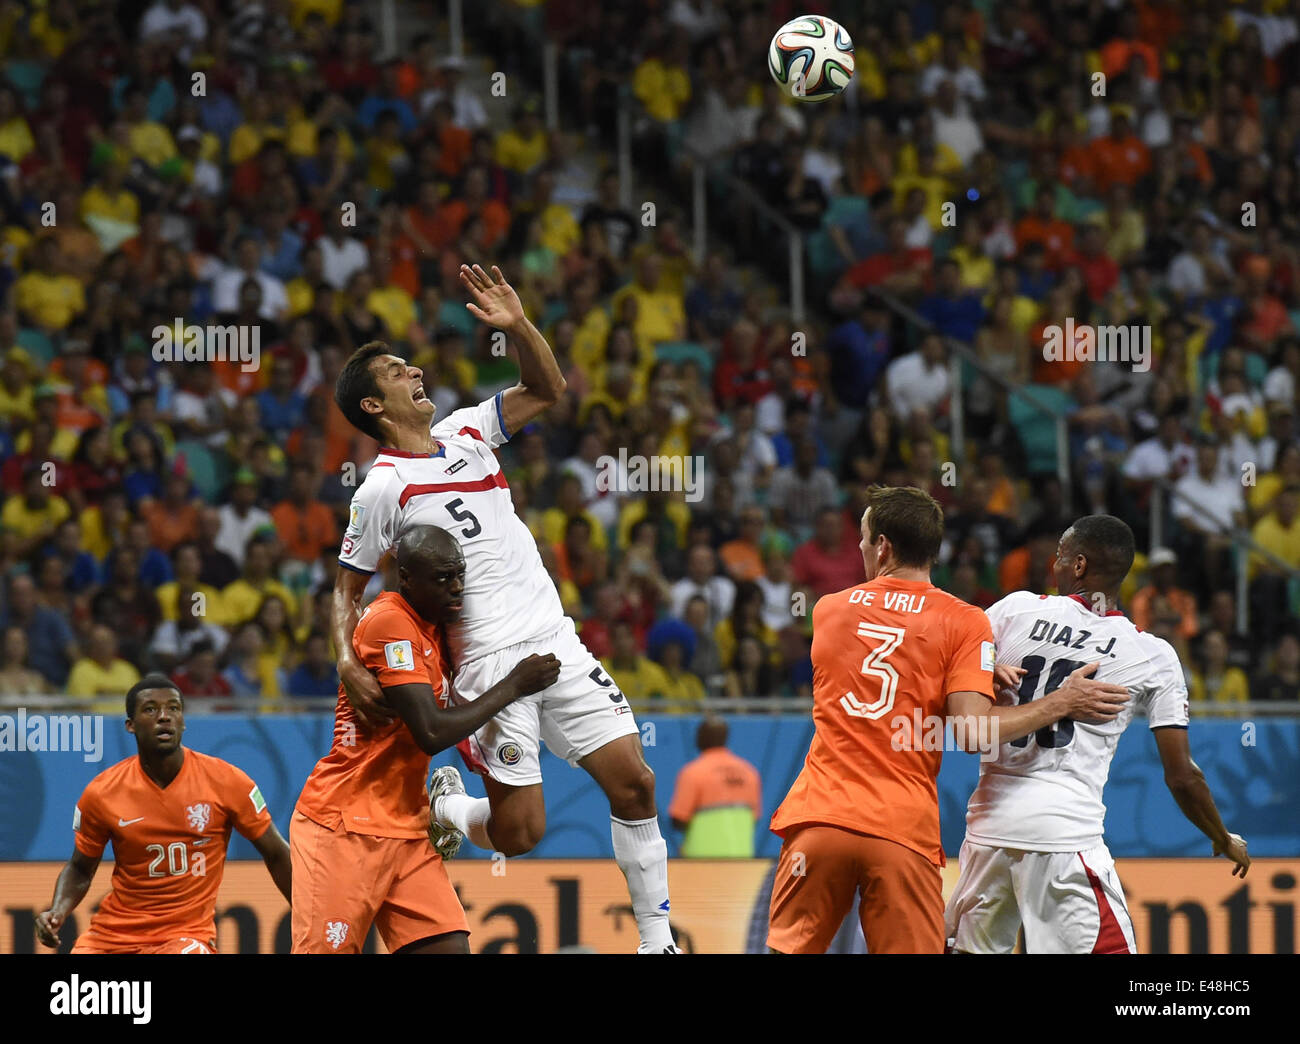 Salvador, Brazil. 5th July, 2014. Costa Rica's Celso Borges (up) jumps for a header during a quarter-finals match between Netherlands and Costa Rica of 2014 FIFA World Cup at the Arena Fonte Nova Stadium in Salvador, Brazil, on July 5, 2014. Credit:  Lui Siu Wai/Xinhua/Alamy Live News Stock Photo